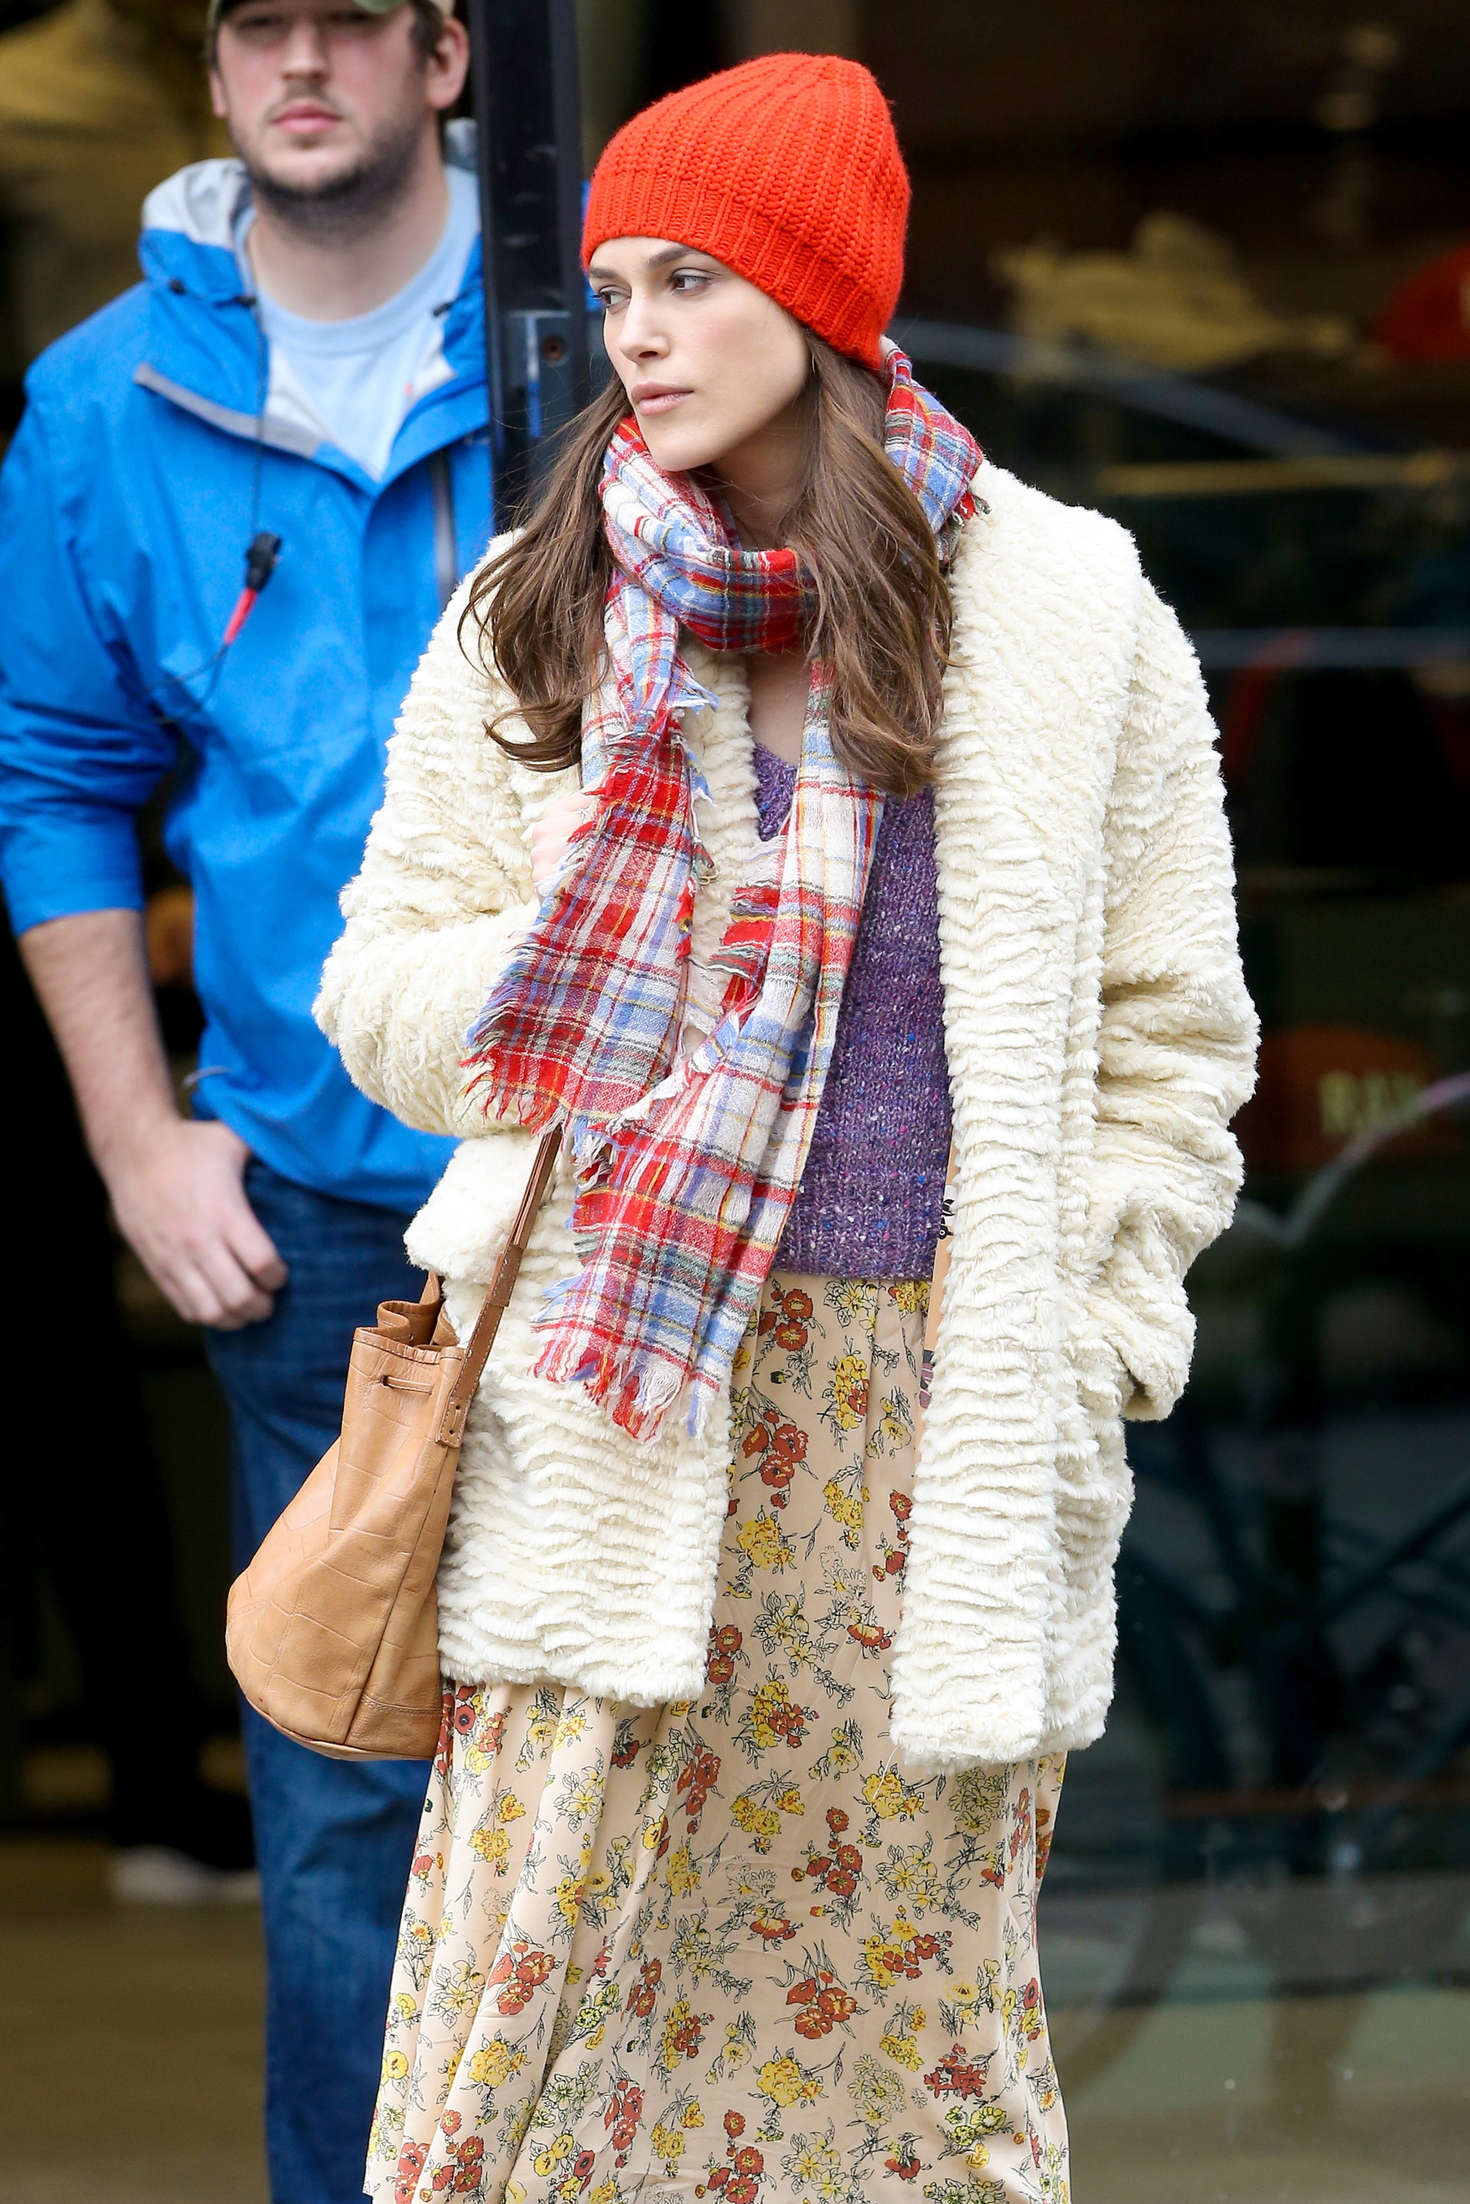 Keira Knightley â€“ Filming â€˜Collateral Beautyâ€™ set in New York